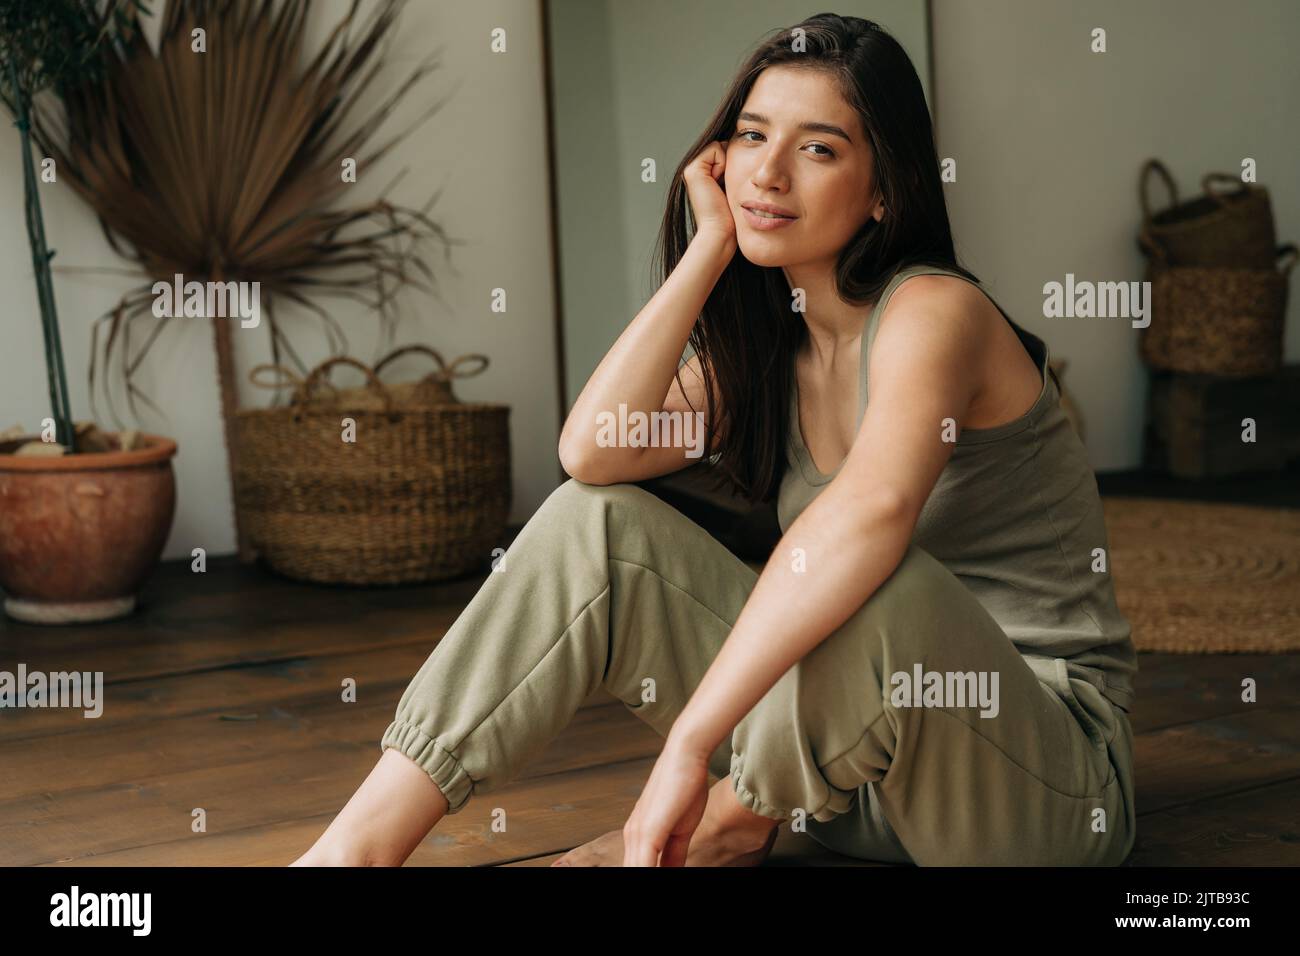 Portrait of a serene beautiful young brunette woman sitting on the floor. Stock Photo